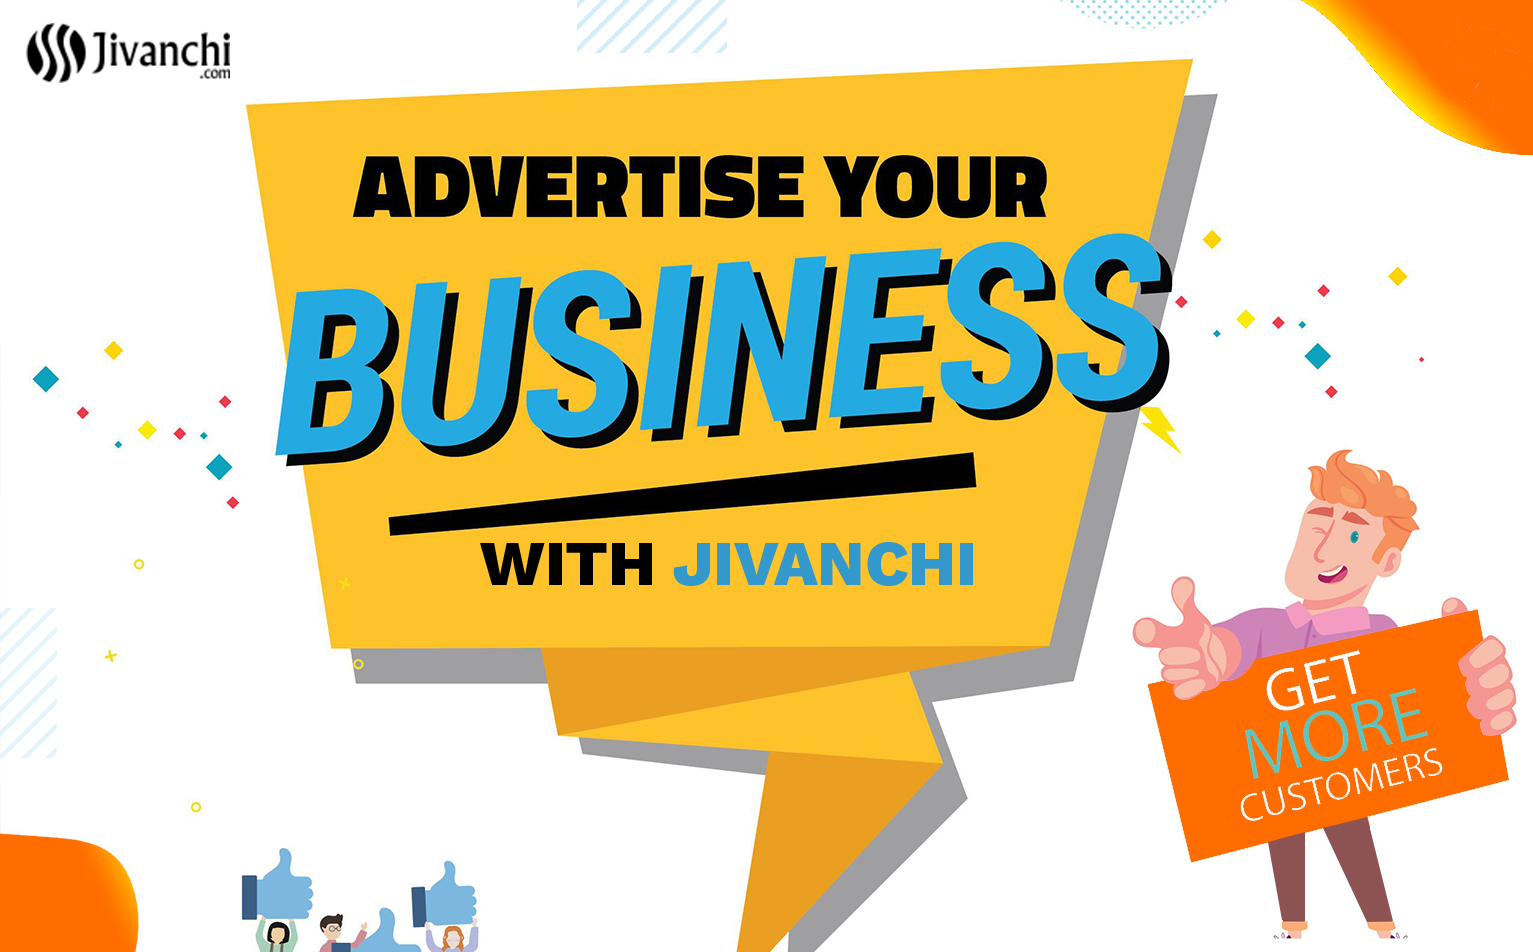 Why should you list your business on Jivanchi?